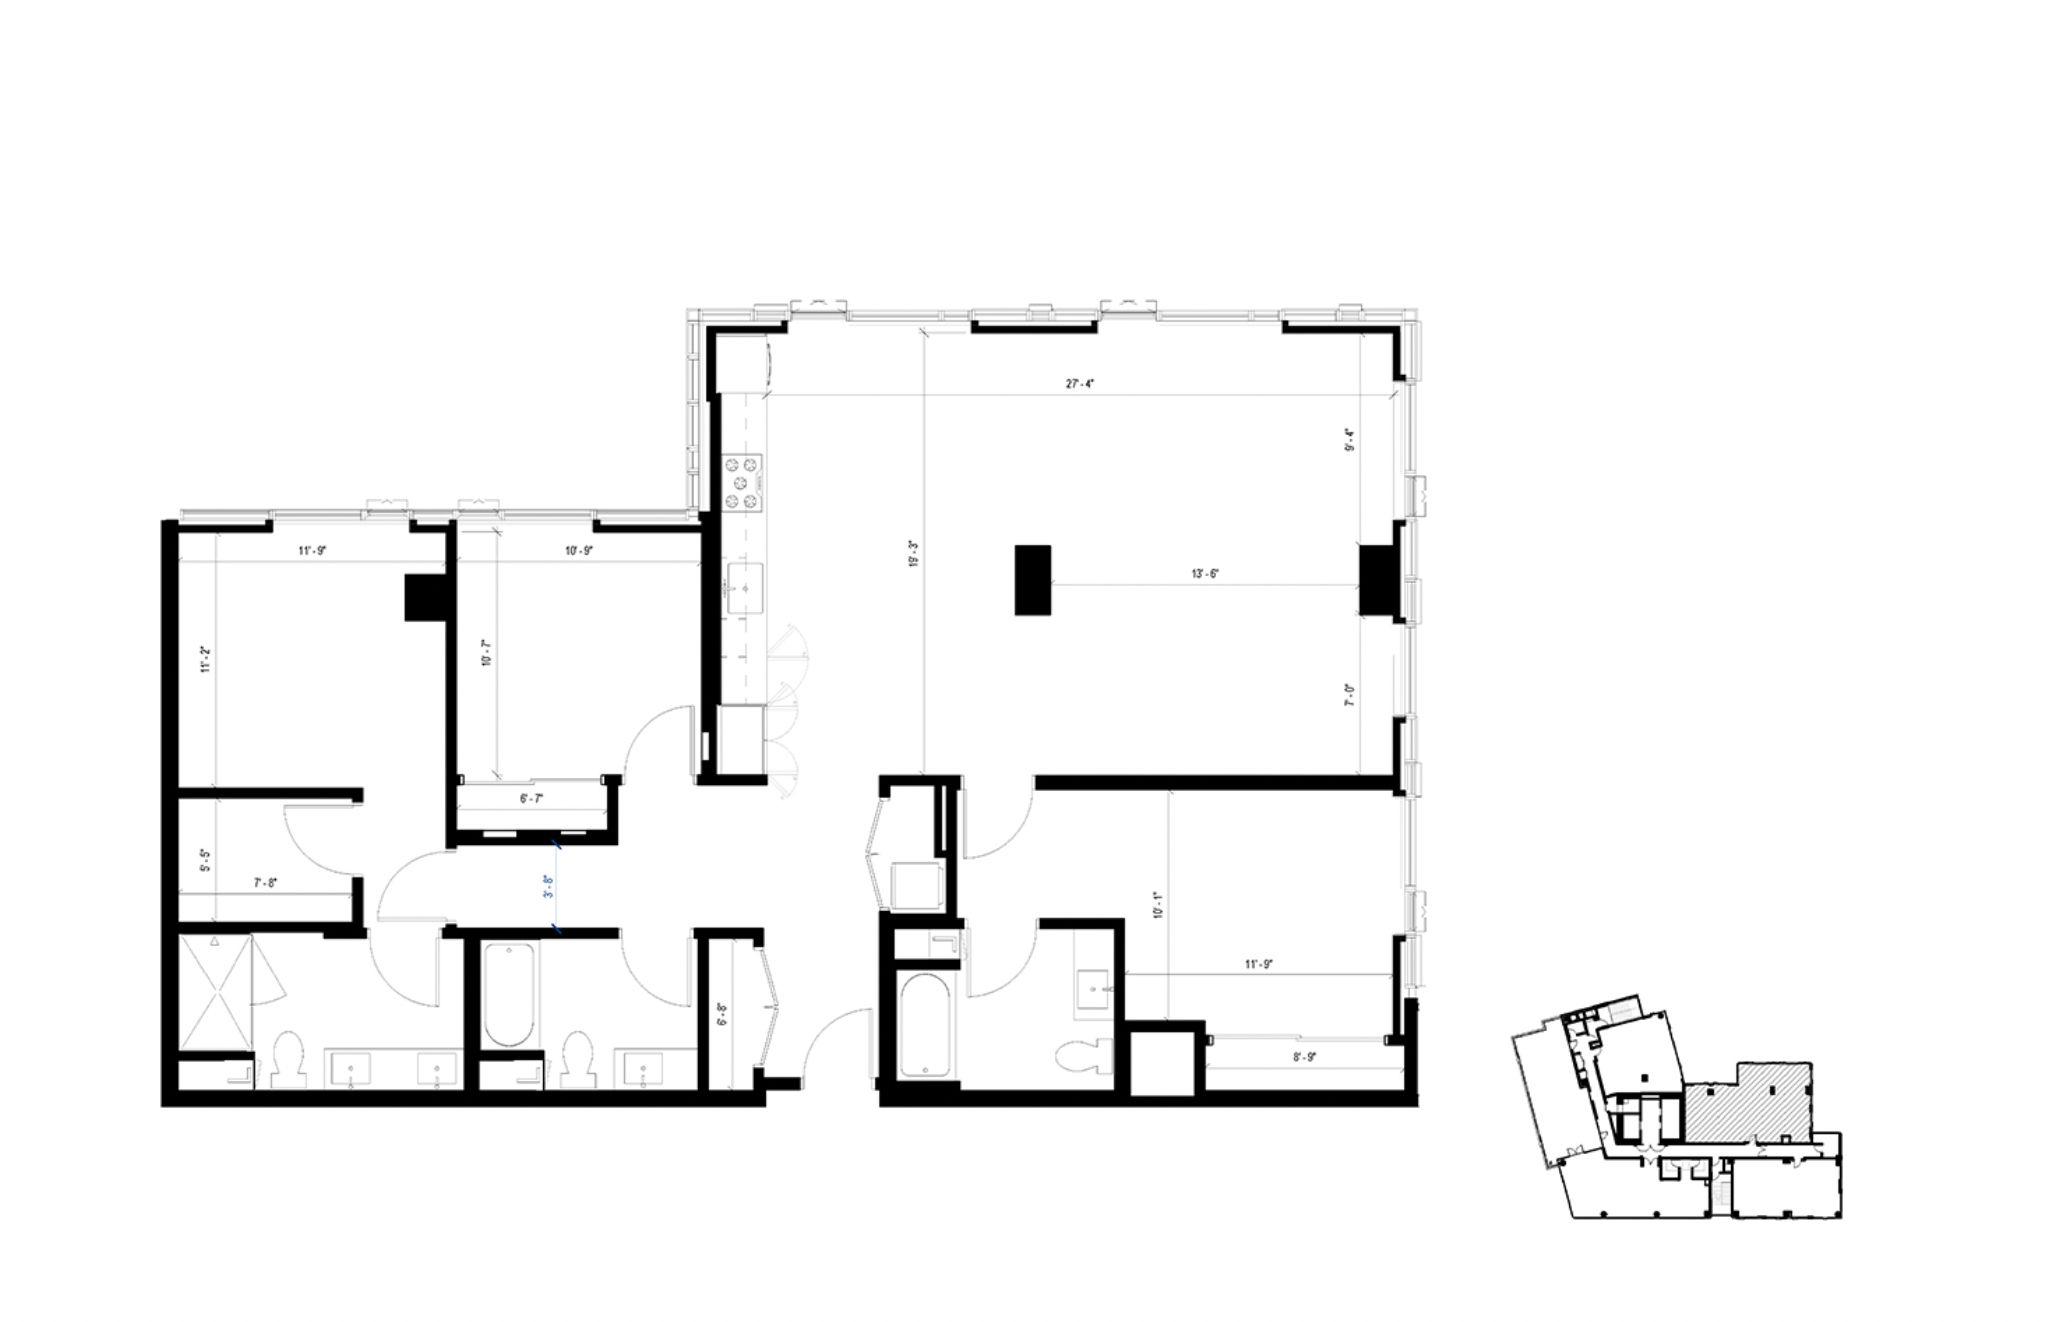 Forma unit 23-07 floor plan, a three-bedroom penthouse near the top floor, courtesy Holland Residential